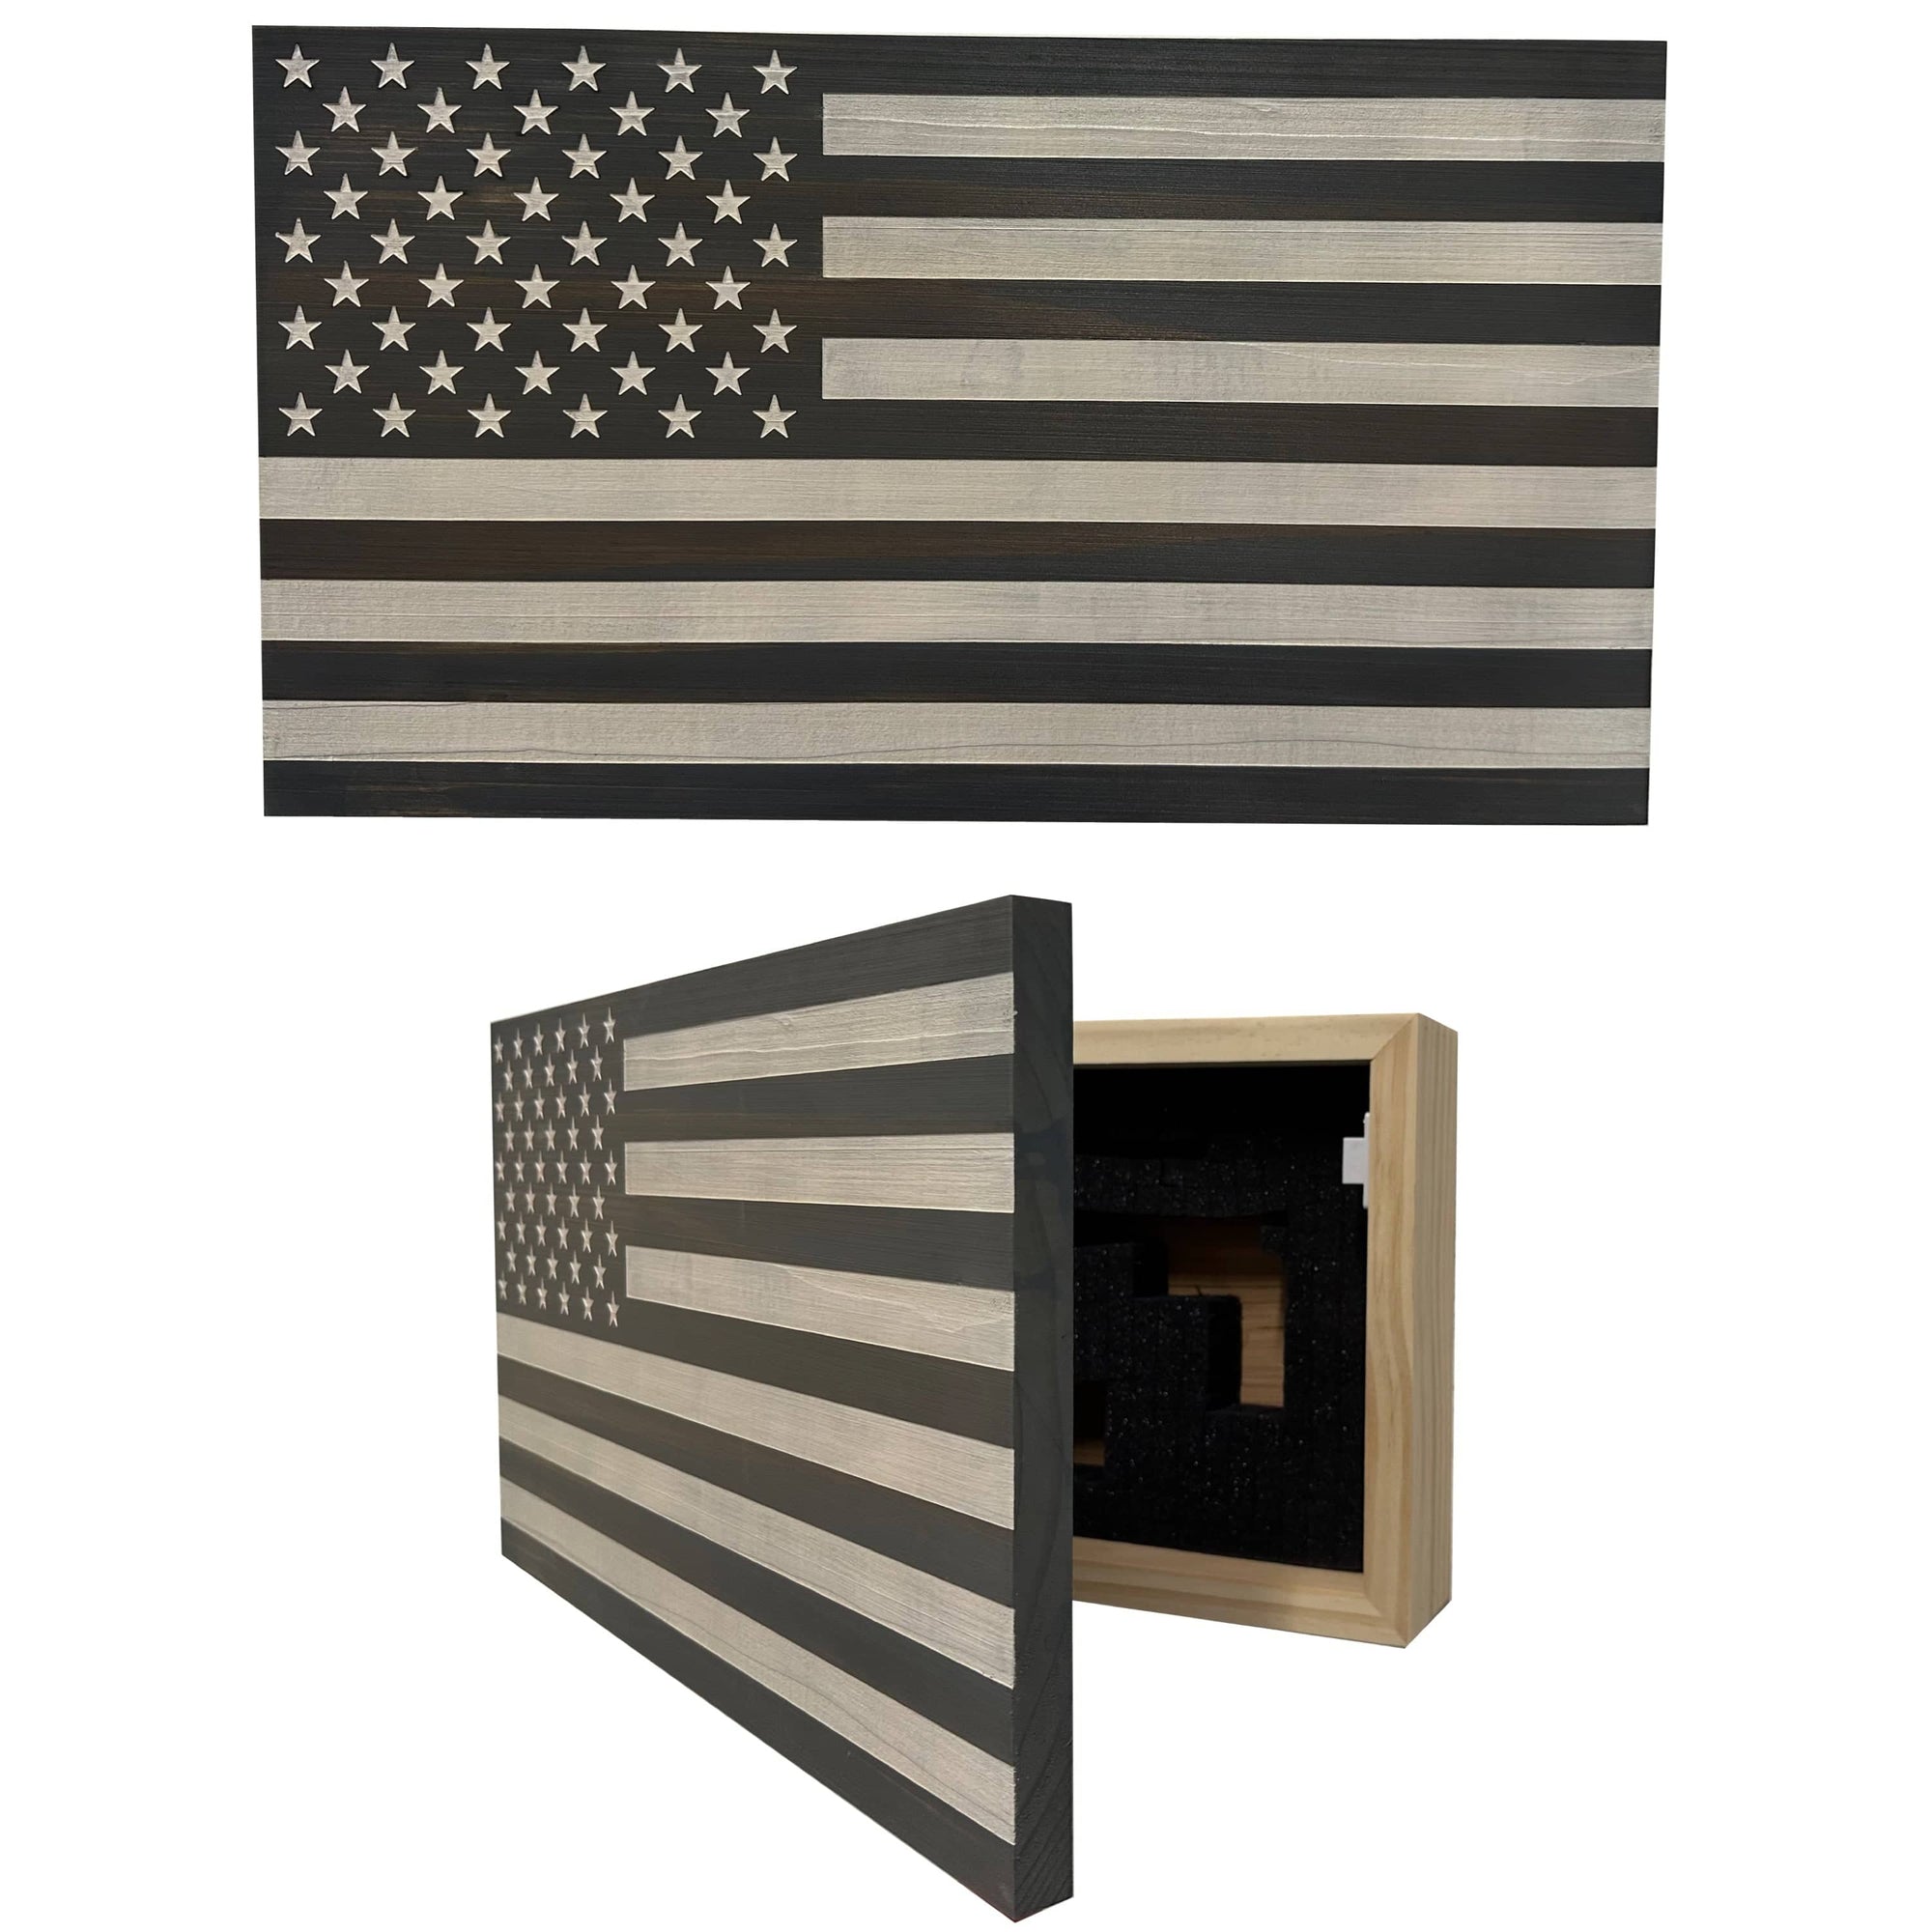 American Flag Decorative & Secure Wall-Mounted Gun Cabinet (Gray & White) Armadillo Safe and Vault